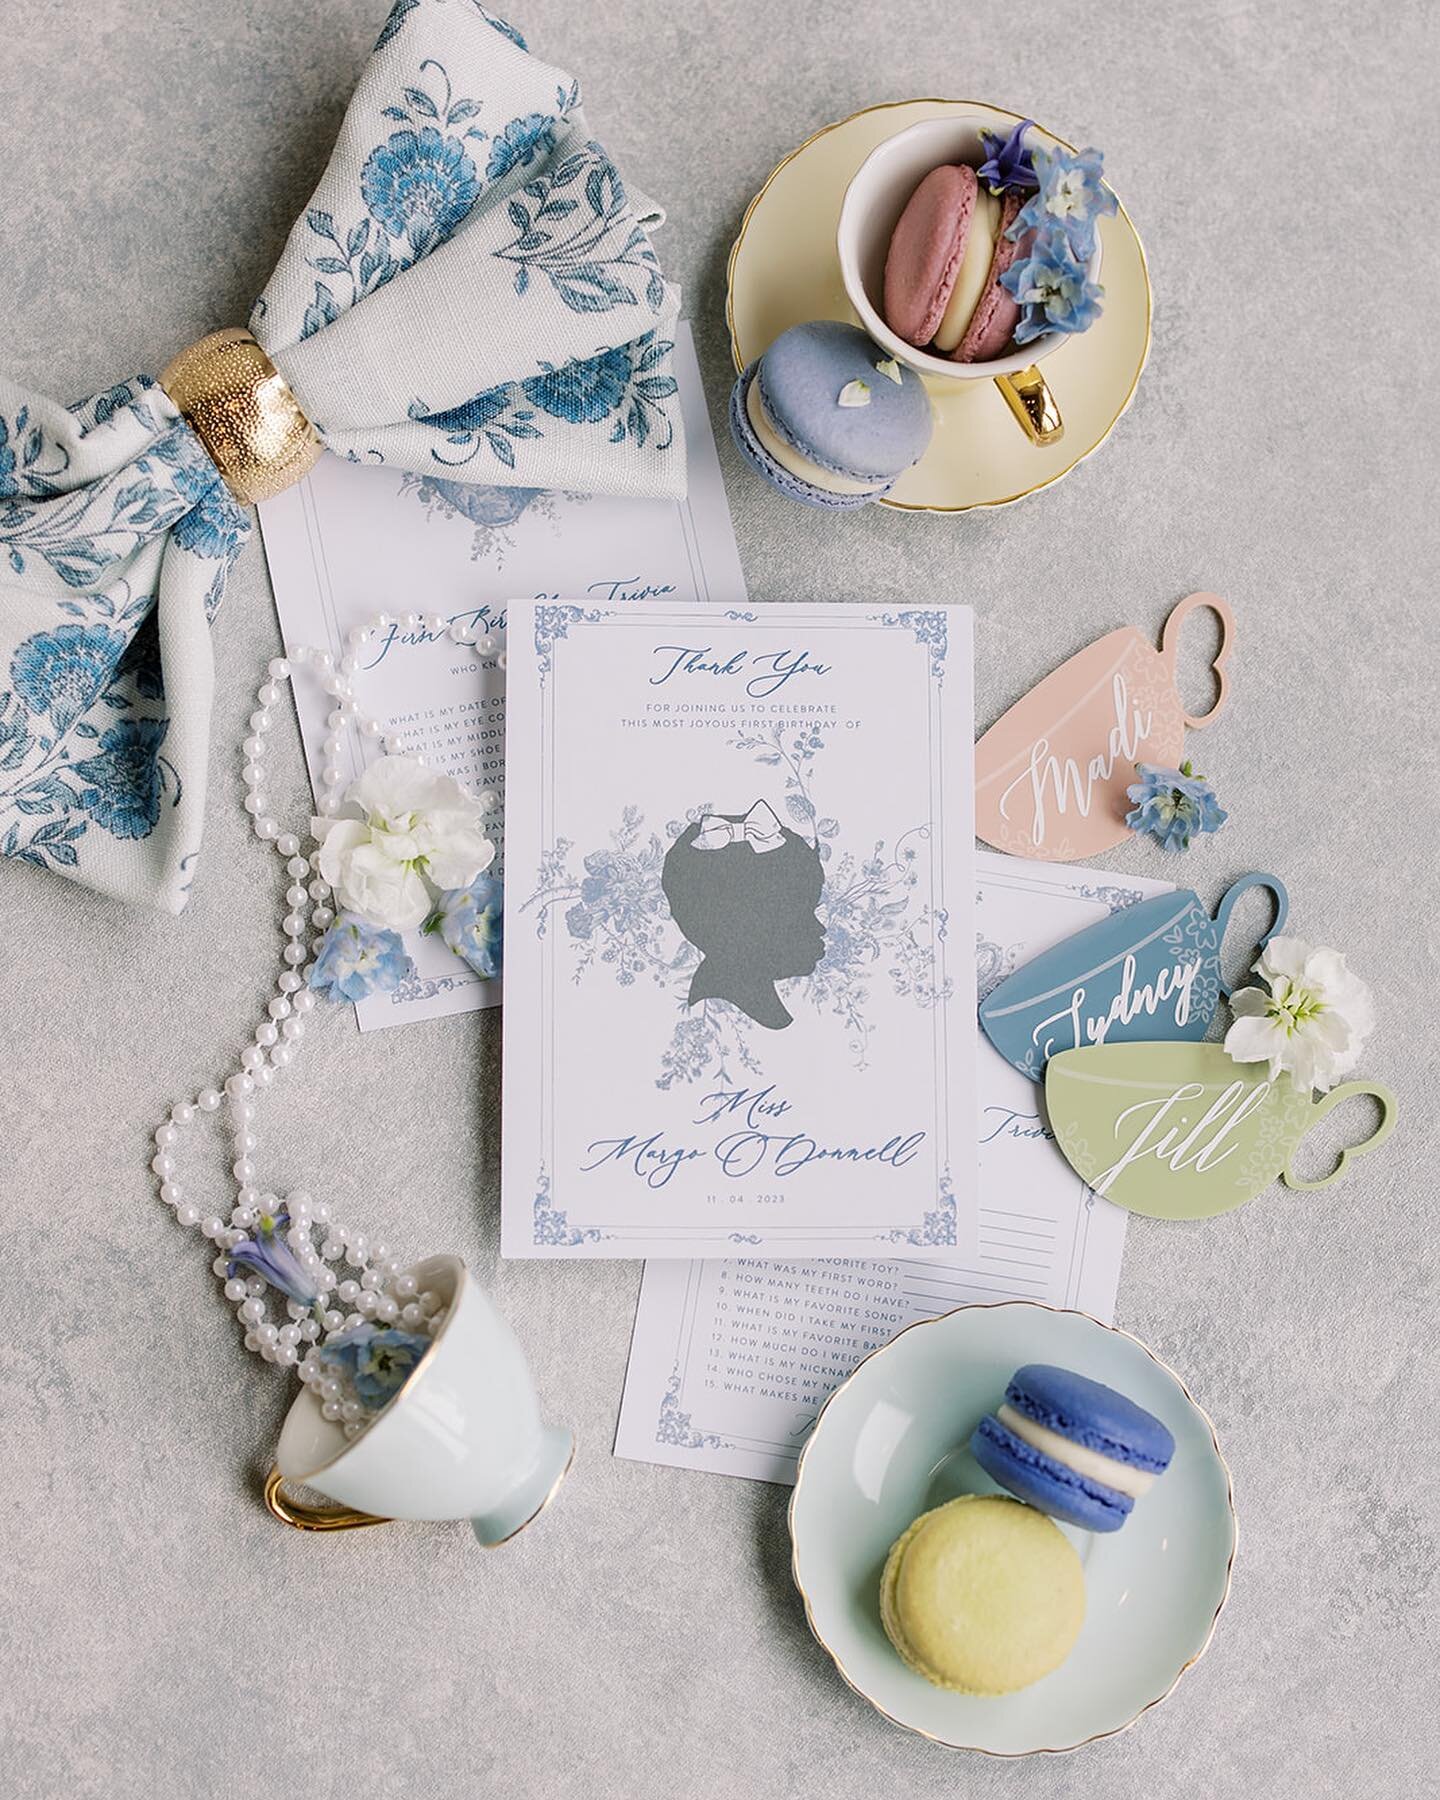 A few more details from our girlies first birthday. Inspired by Mary Cassatt&rsquo;s &ldquo;Margot in Blue&rdquo; &mdash; we designed the details and the tablescape to be whimsical, playful and elegant. Just like our Margo Grace 🩵

Check out our sto